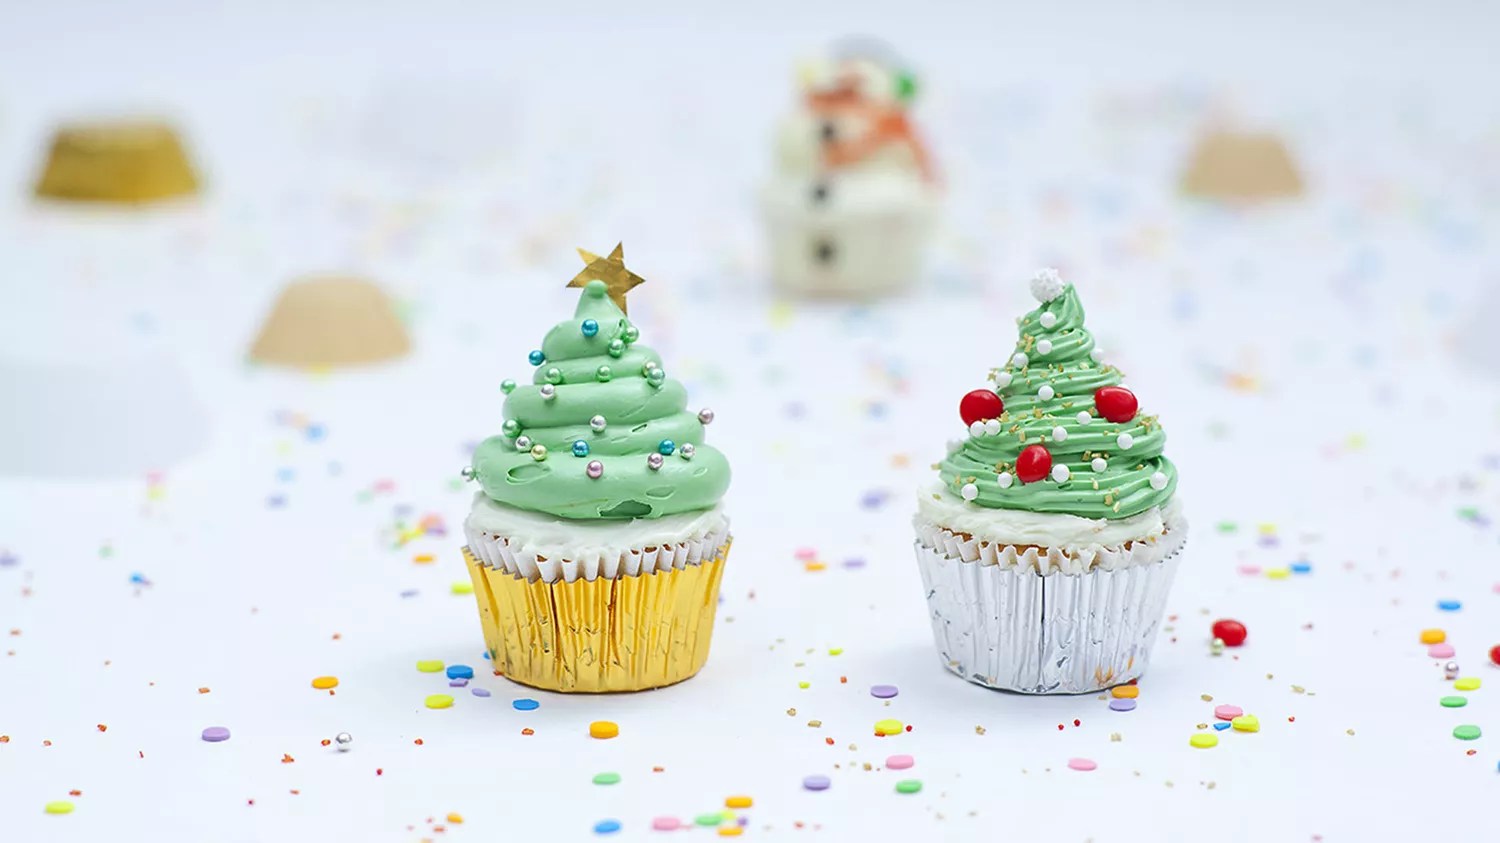 Whip Up Festive Christmas Tree Cupcakes Now!